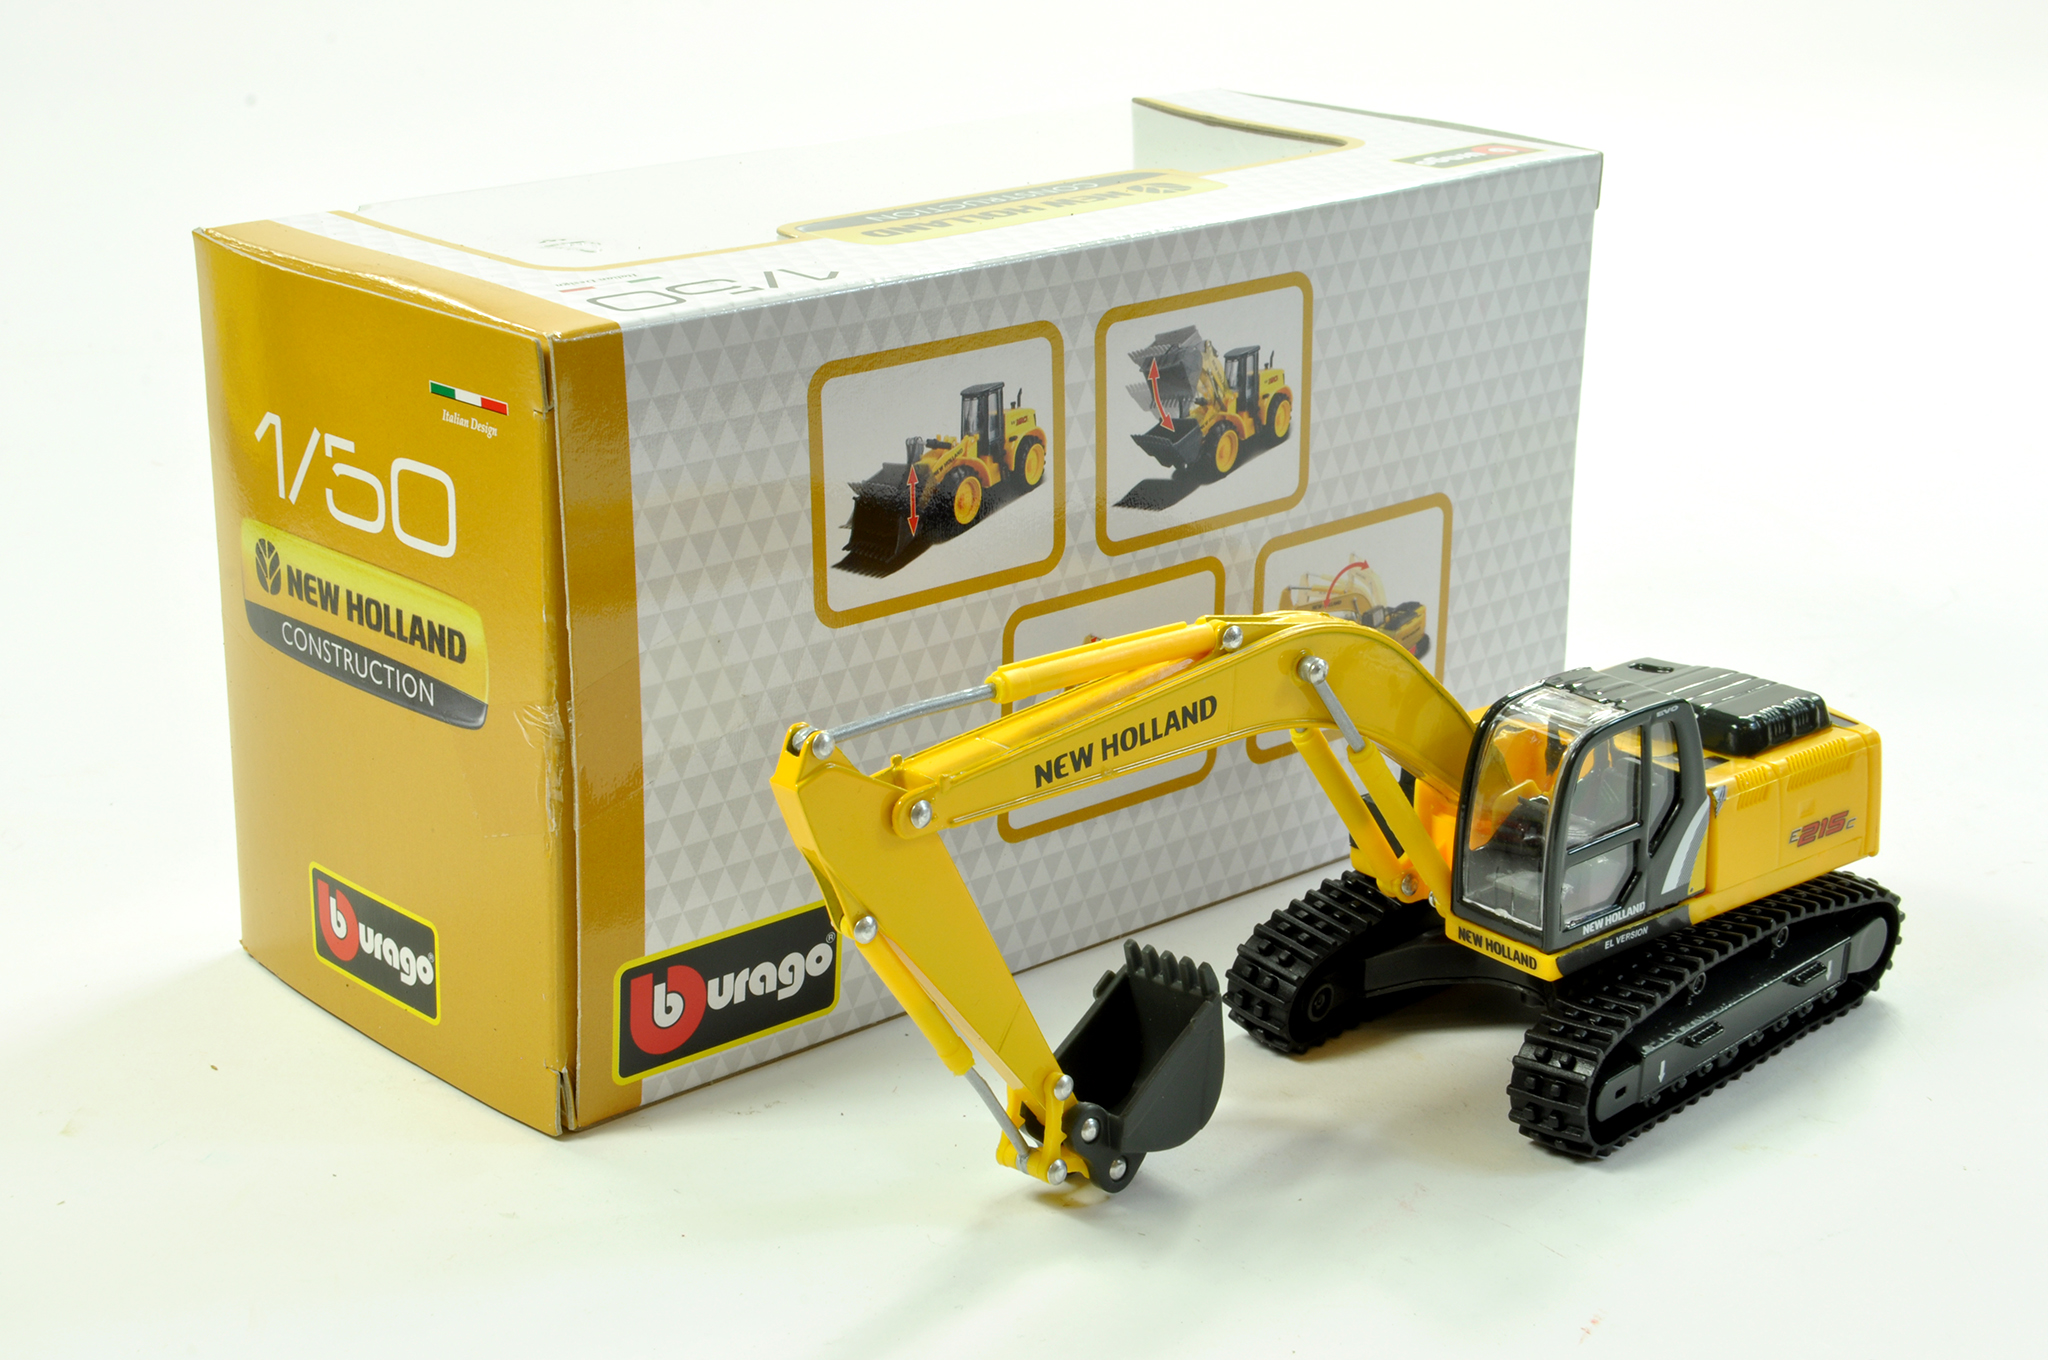 Burago 1/50 diecast construction issue comprising New Holland E215 Tracked Excavator. Excellent with